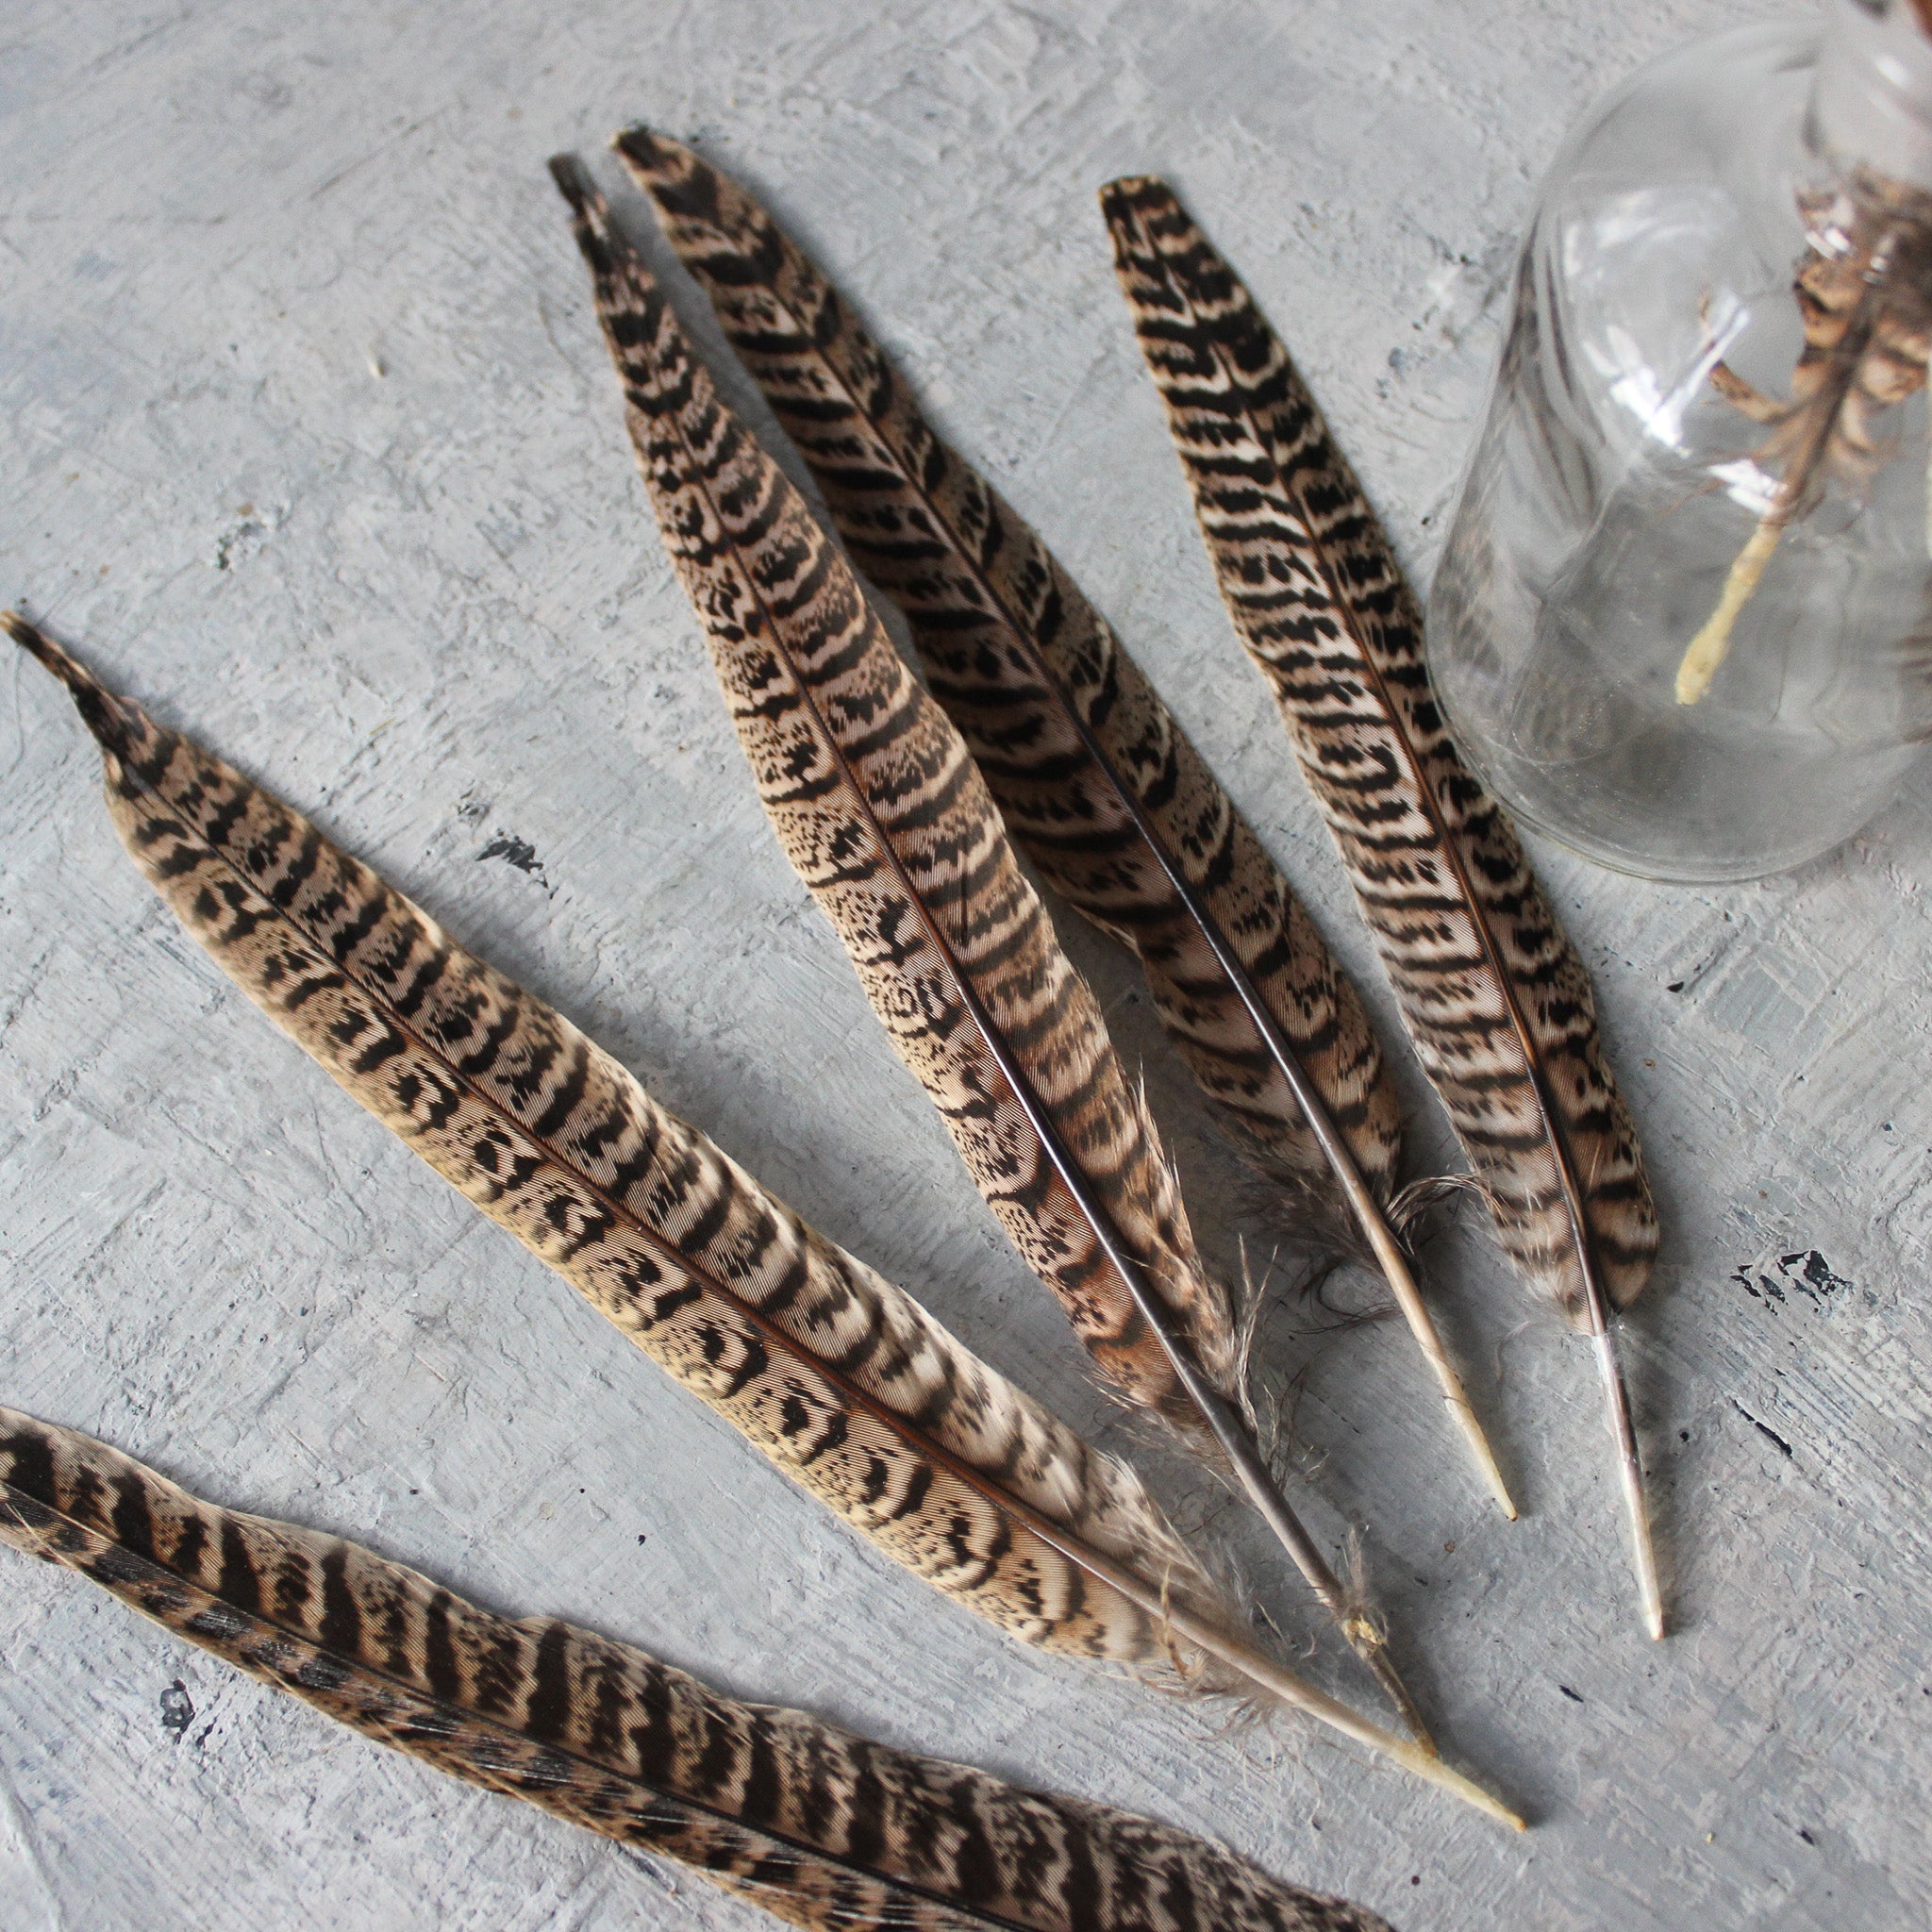 Pheasant Feathers Ethically Sourced - Tribe Castlemaine